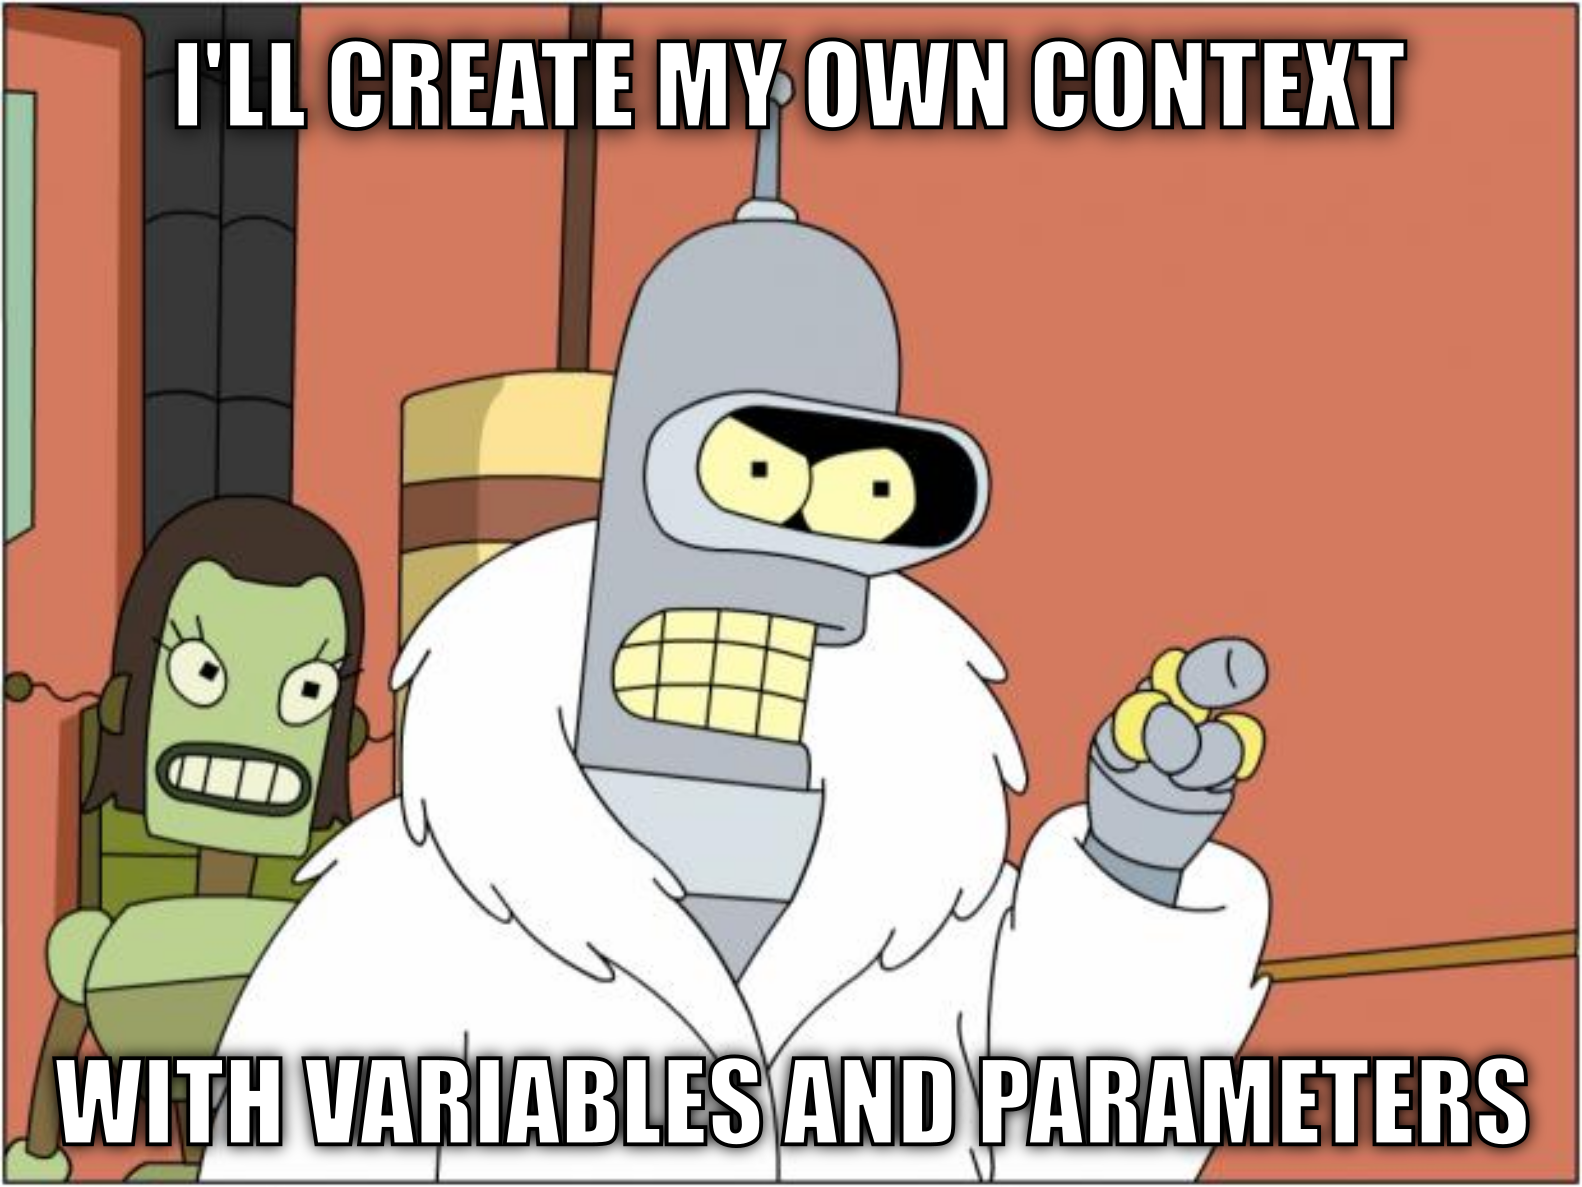 I'll create my own context, with variables and parameters.